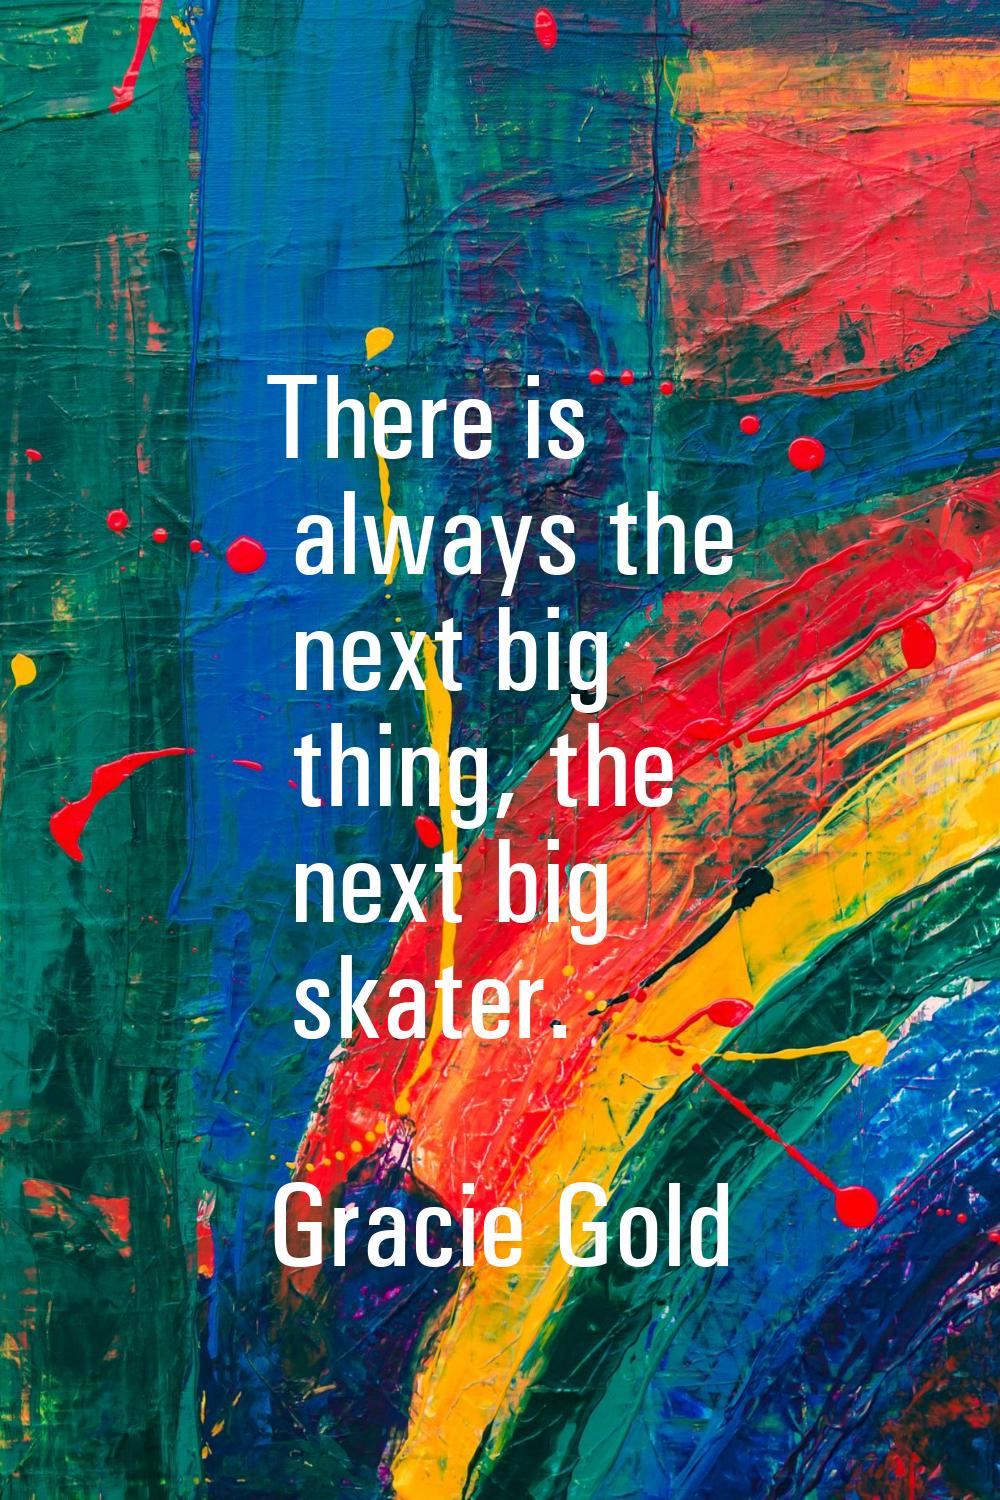 There is always the next big thing, the next big skater.